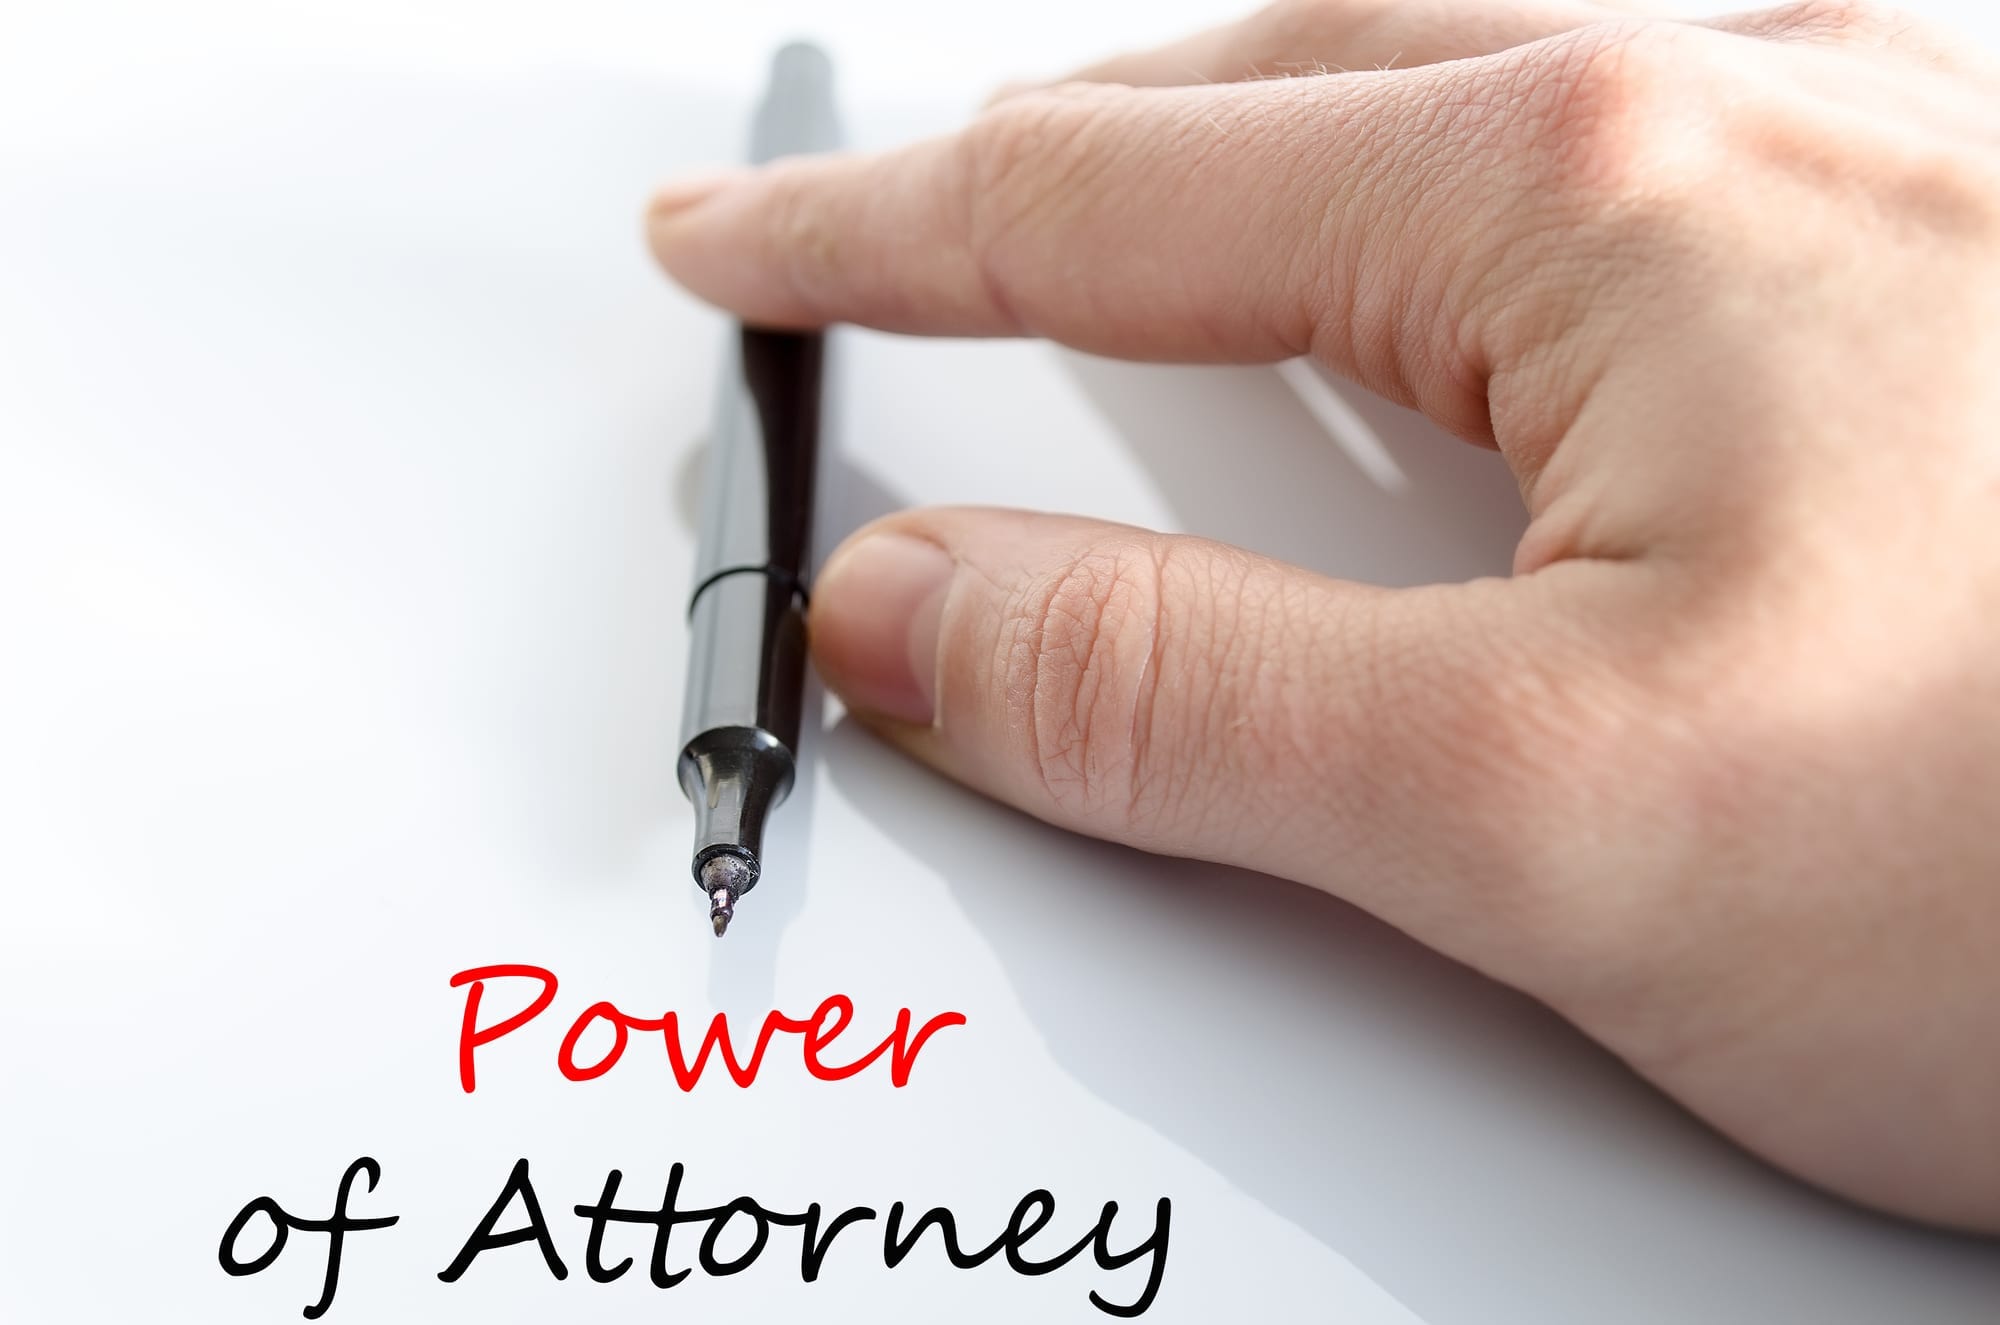 what is a power of attorney